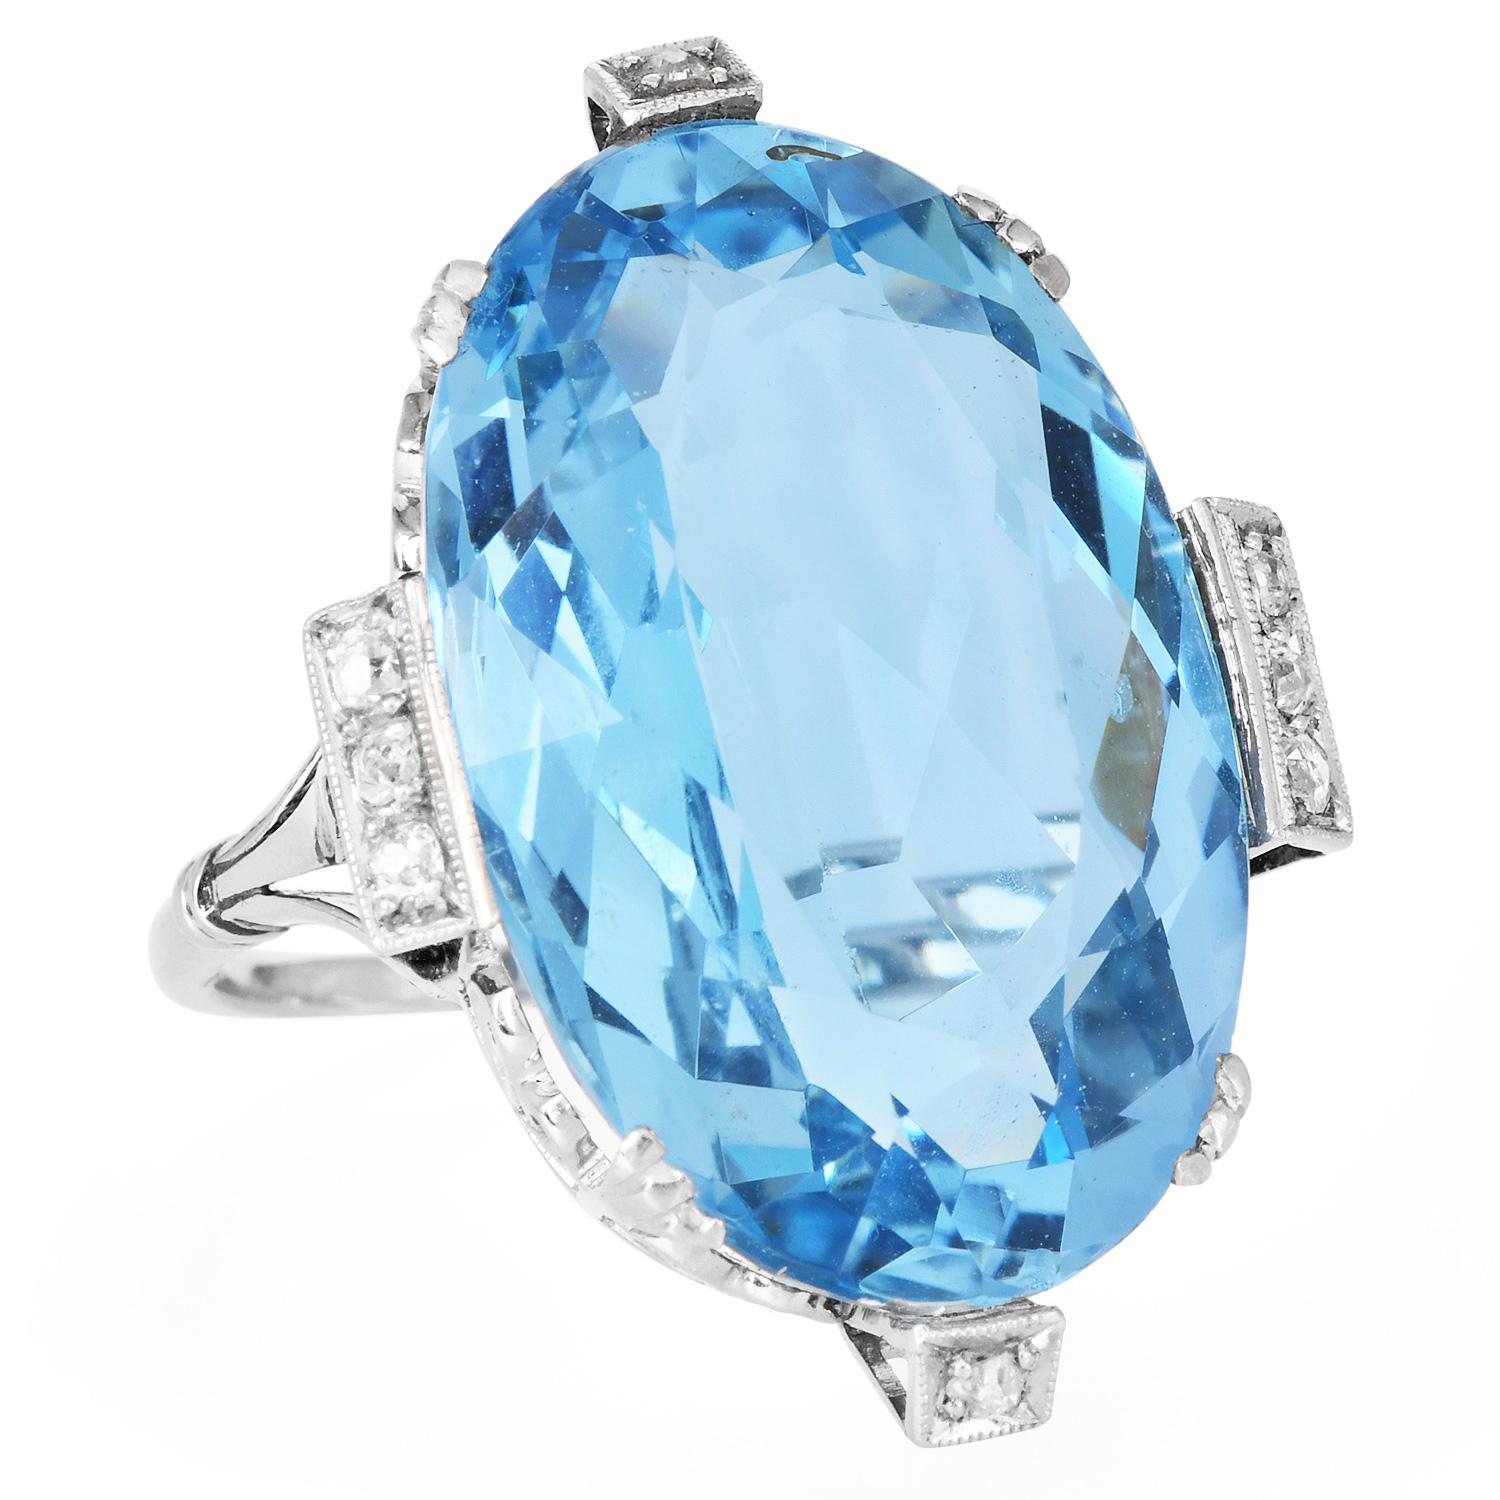 Vintage GIA Ocean Blue 16.83cts Aquamarine Diamond Gold Cocktail Ring For Sale 2